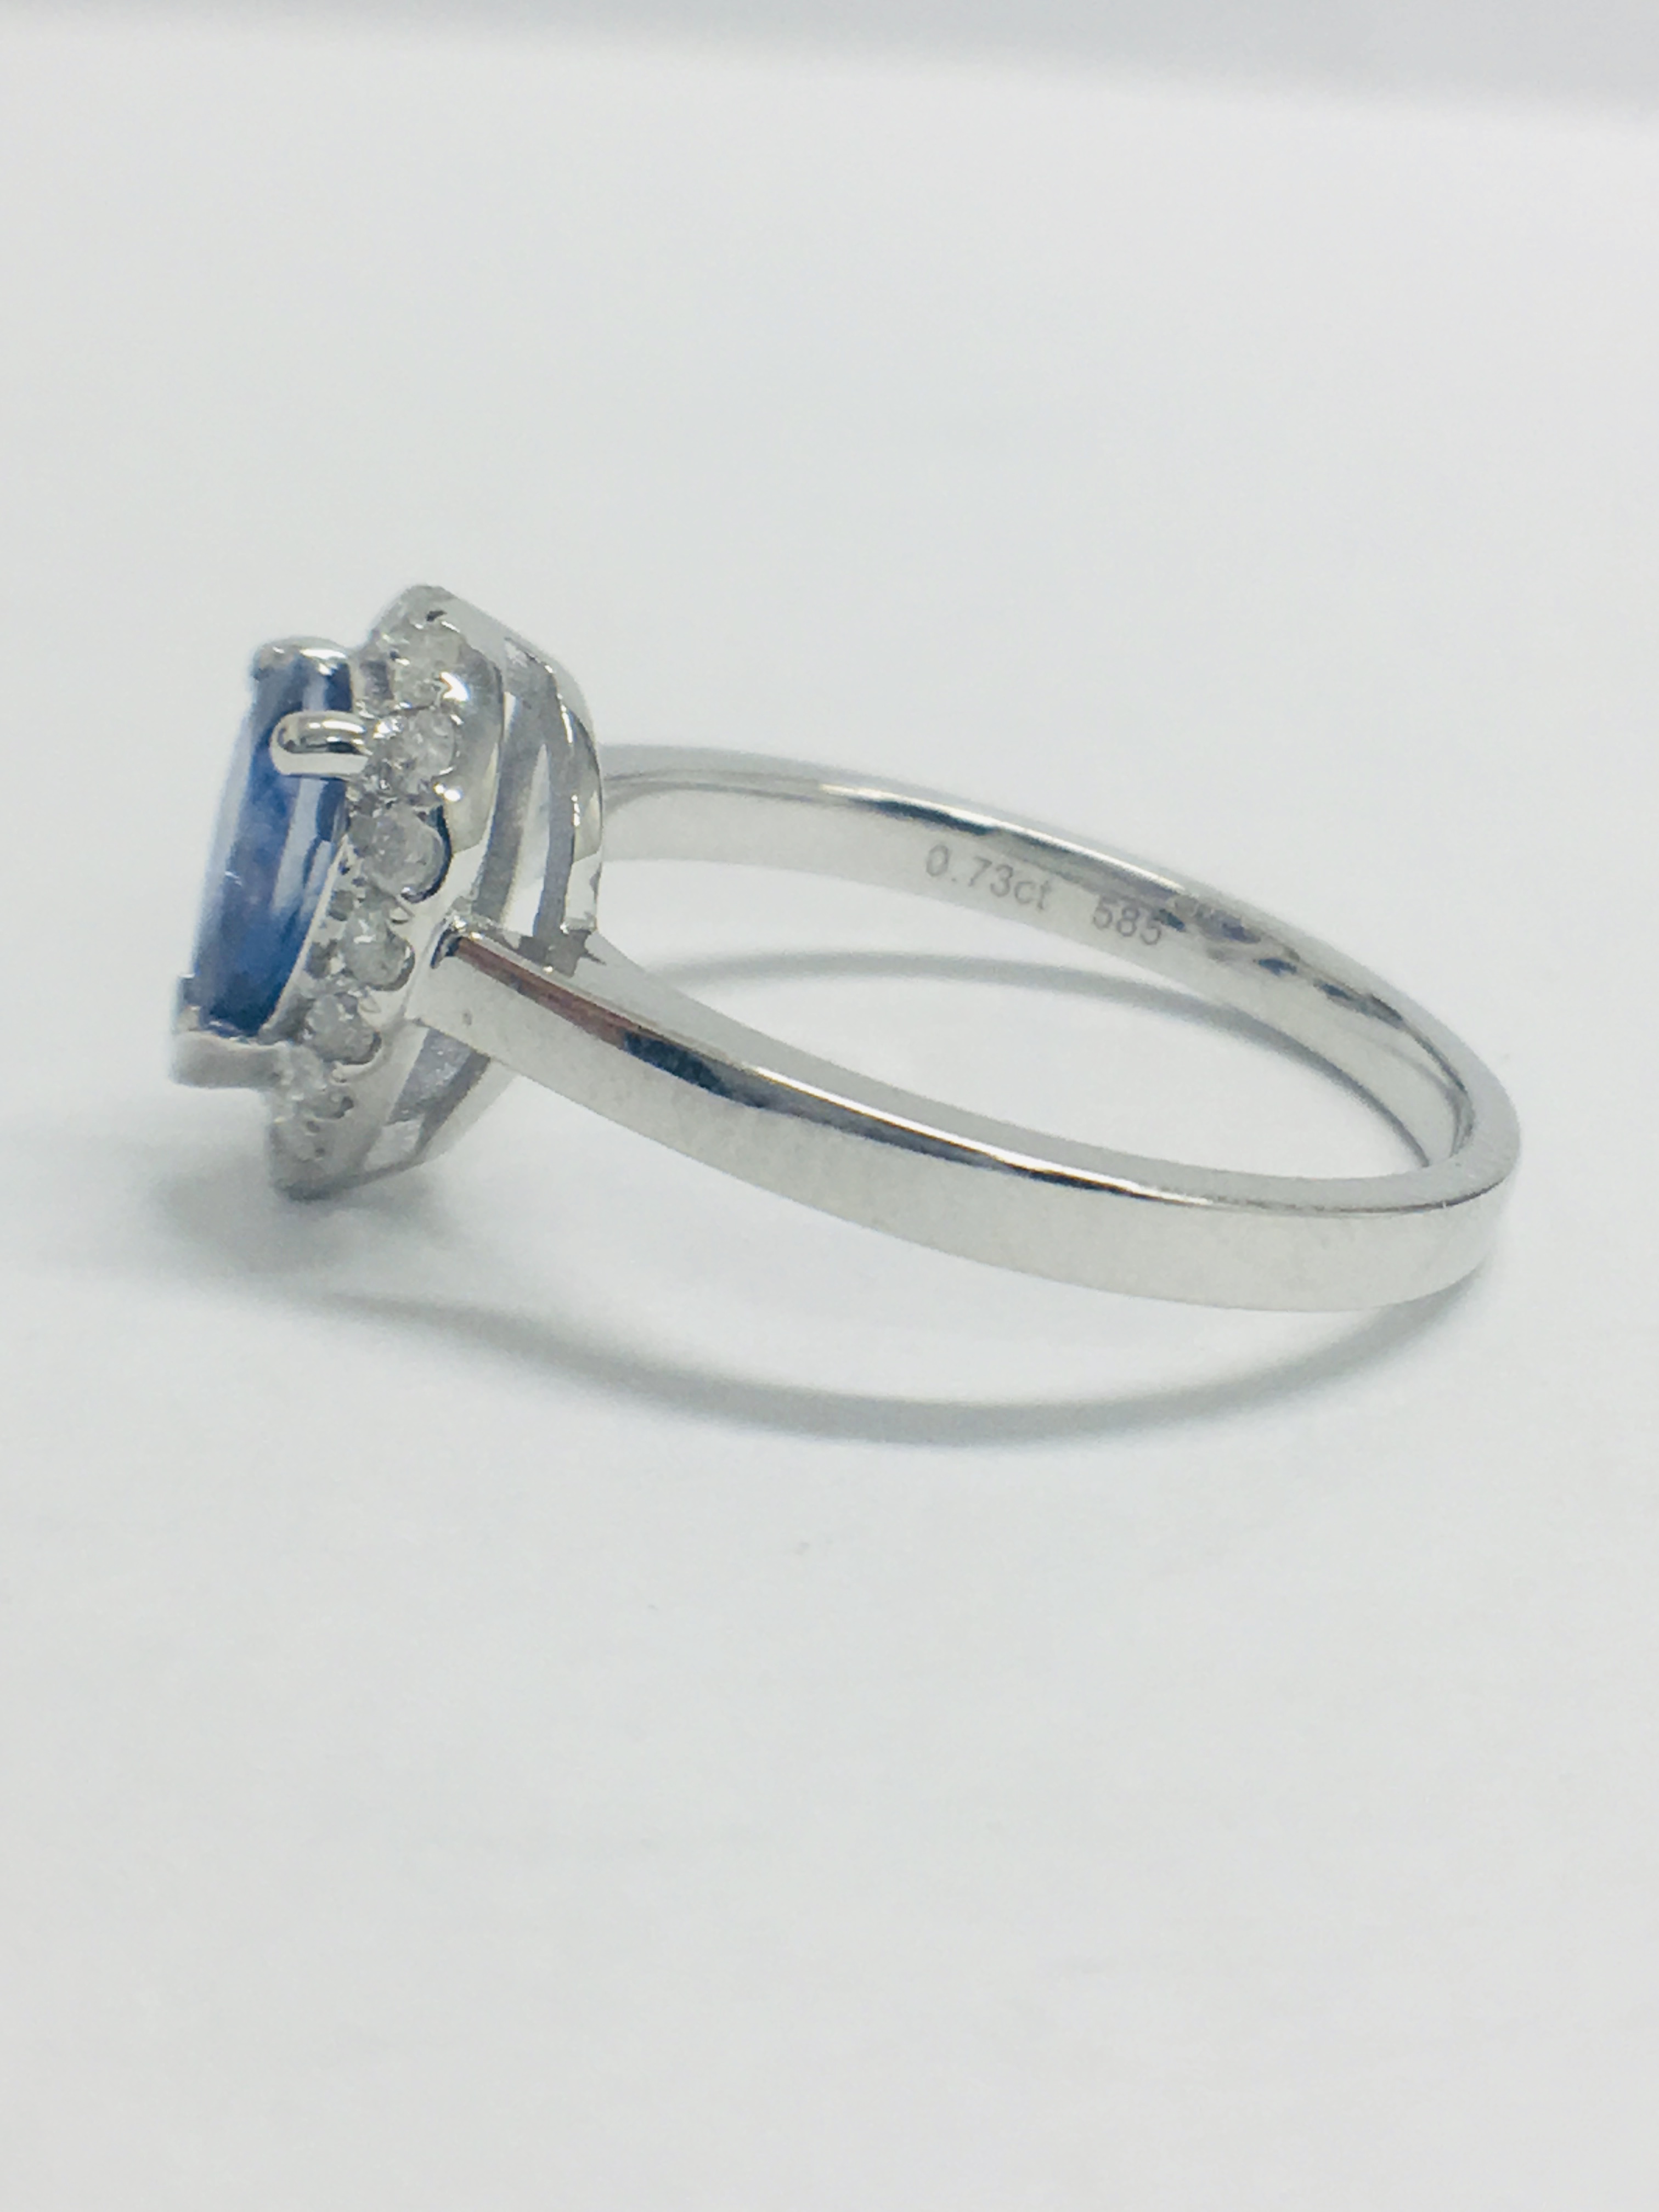 14Ct White Gold Sapphire And Diamond Ring. - Image 3 of 10